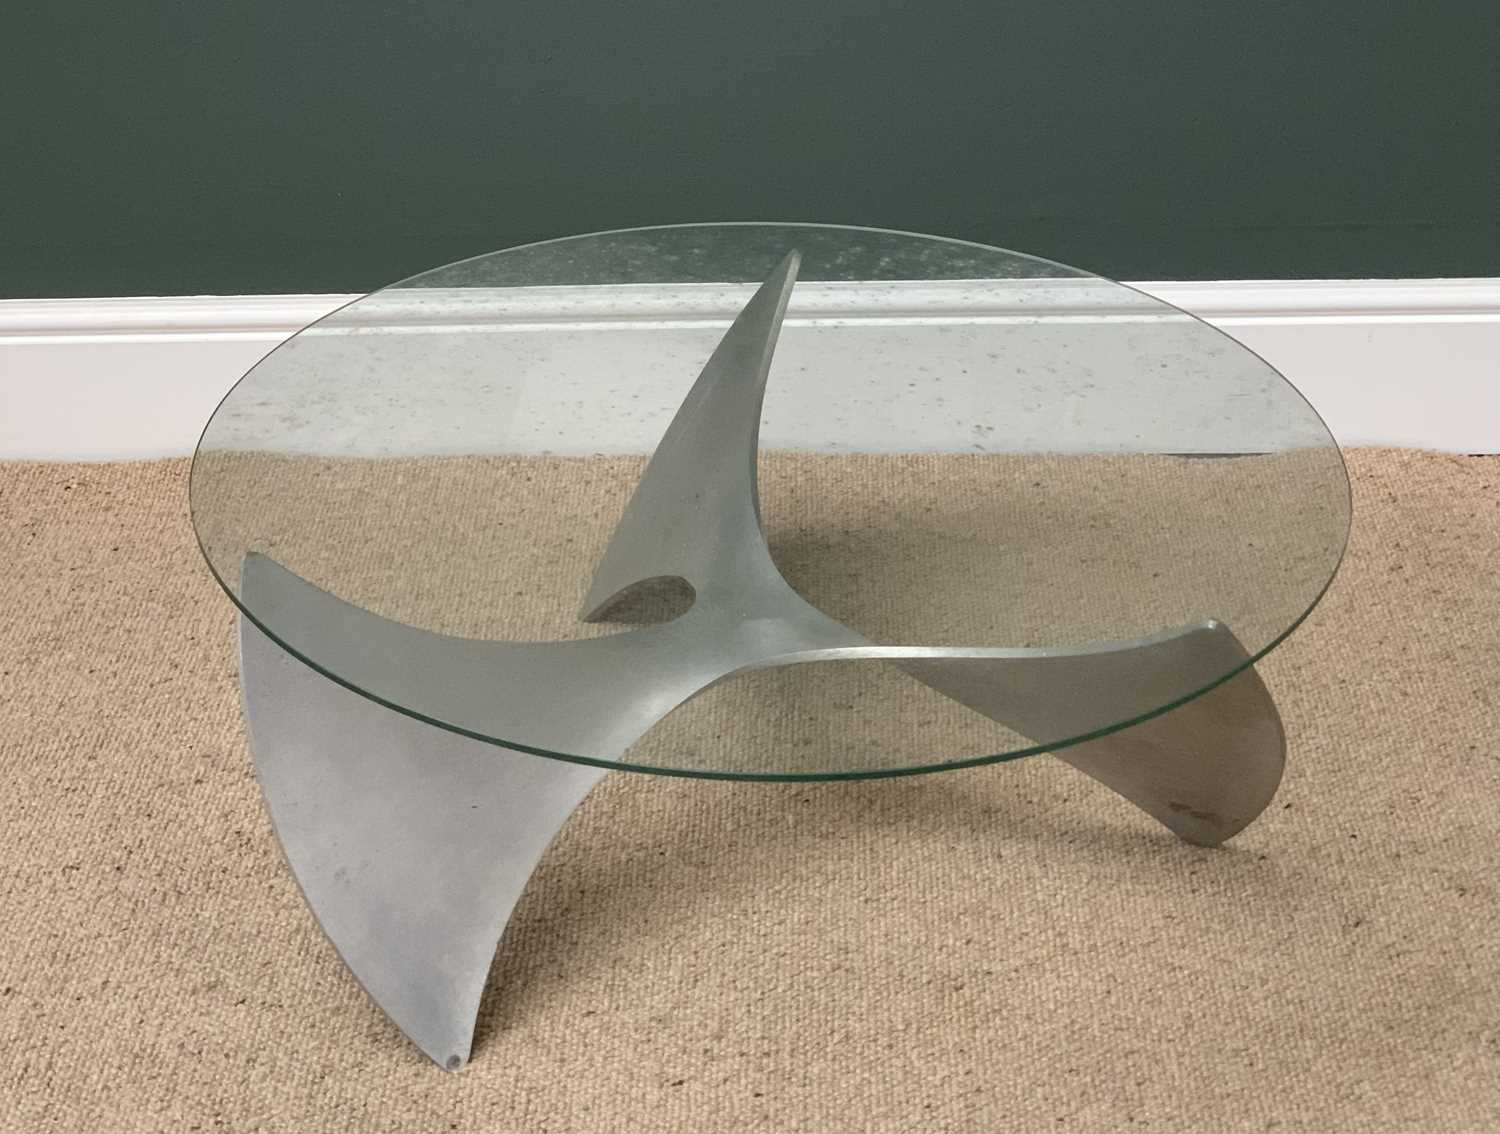 CONTEMPORARY COFFEE TABLE with glass top and propellor shaped alloy? base, 32cms H, 77cms diameter